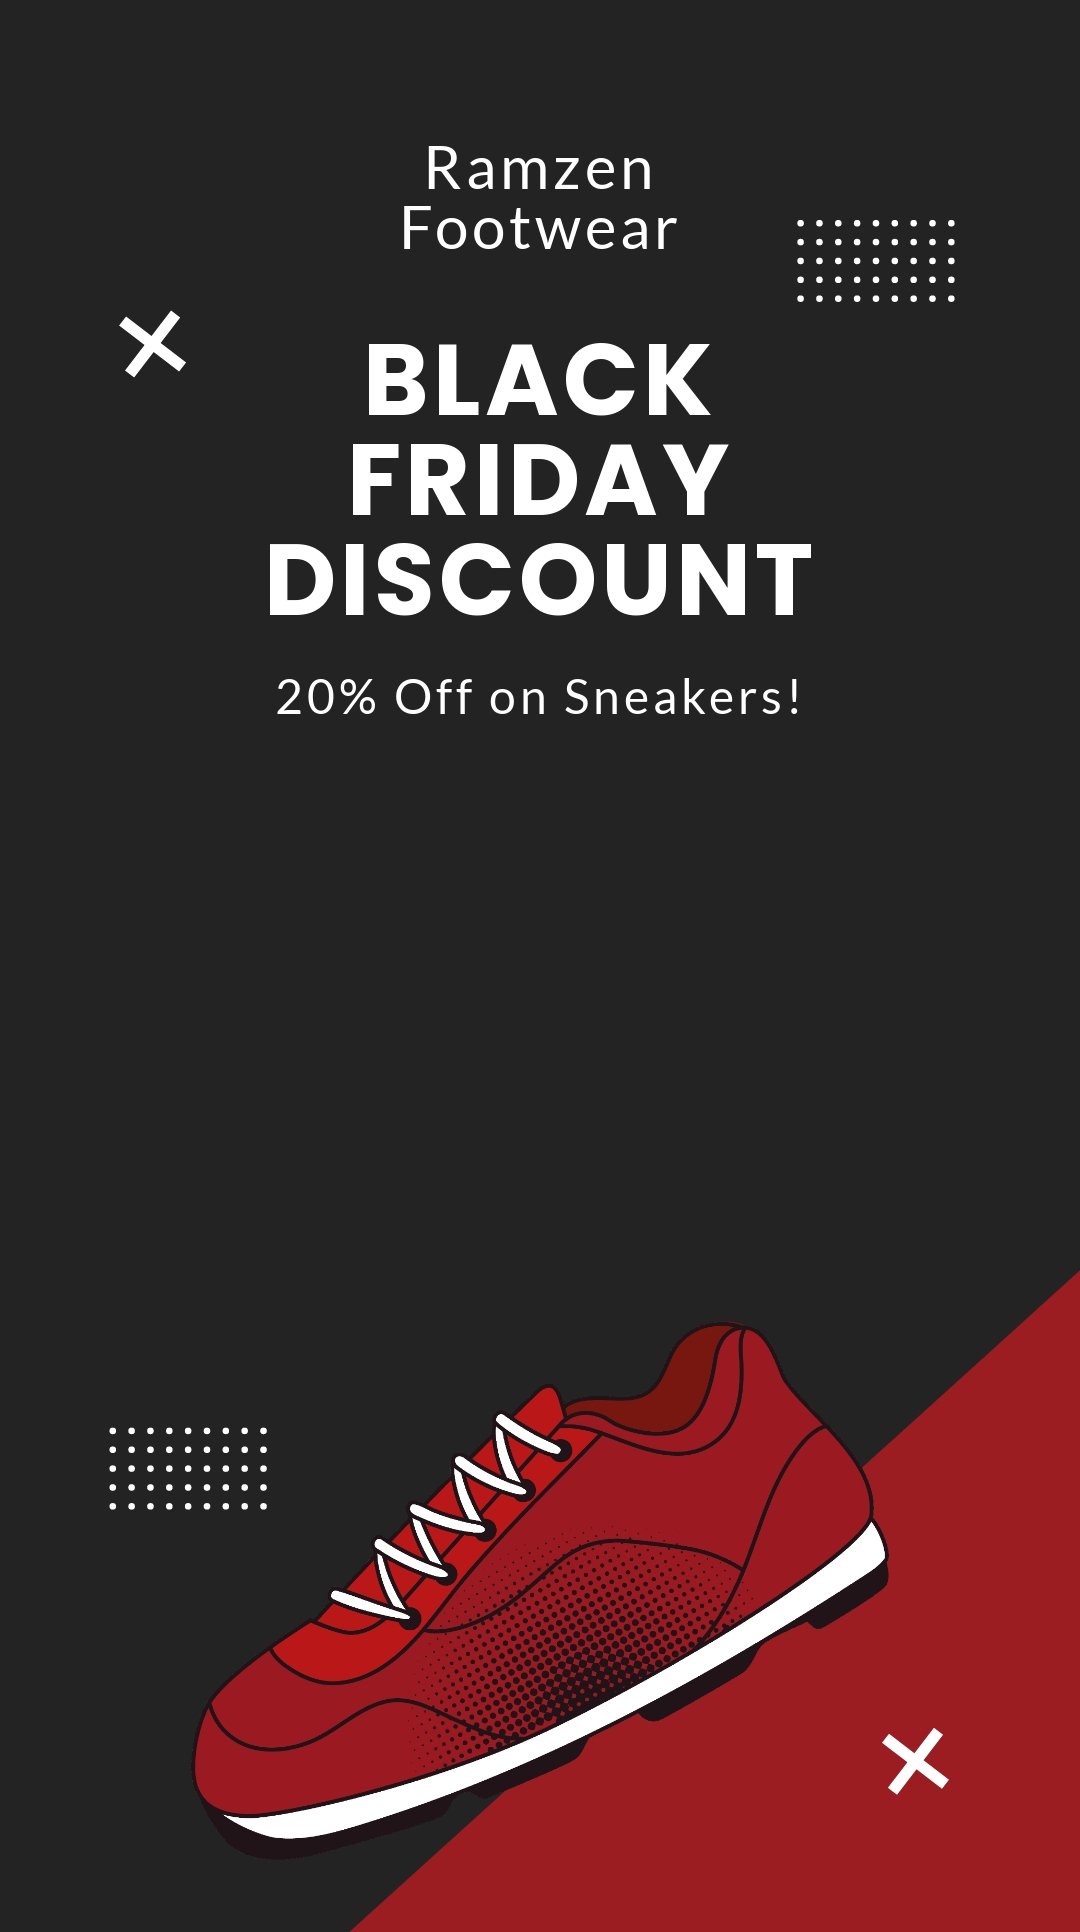 Black Friday Discount Snapchat Geofilter